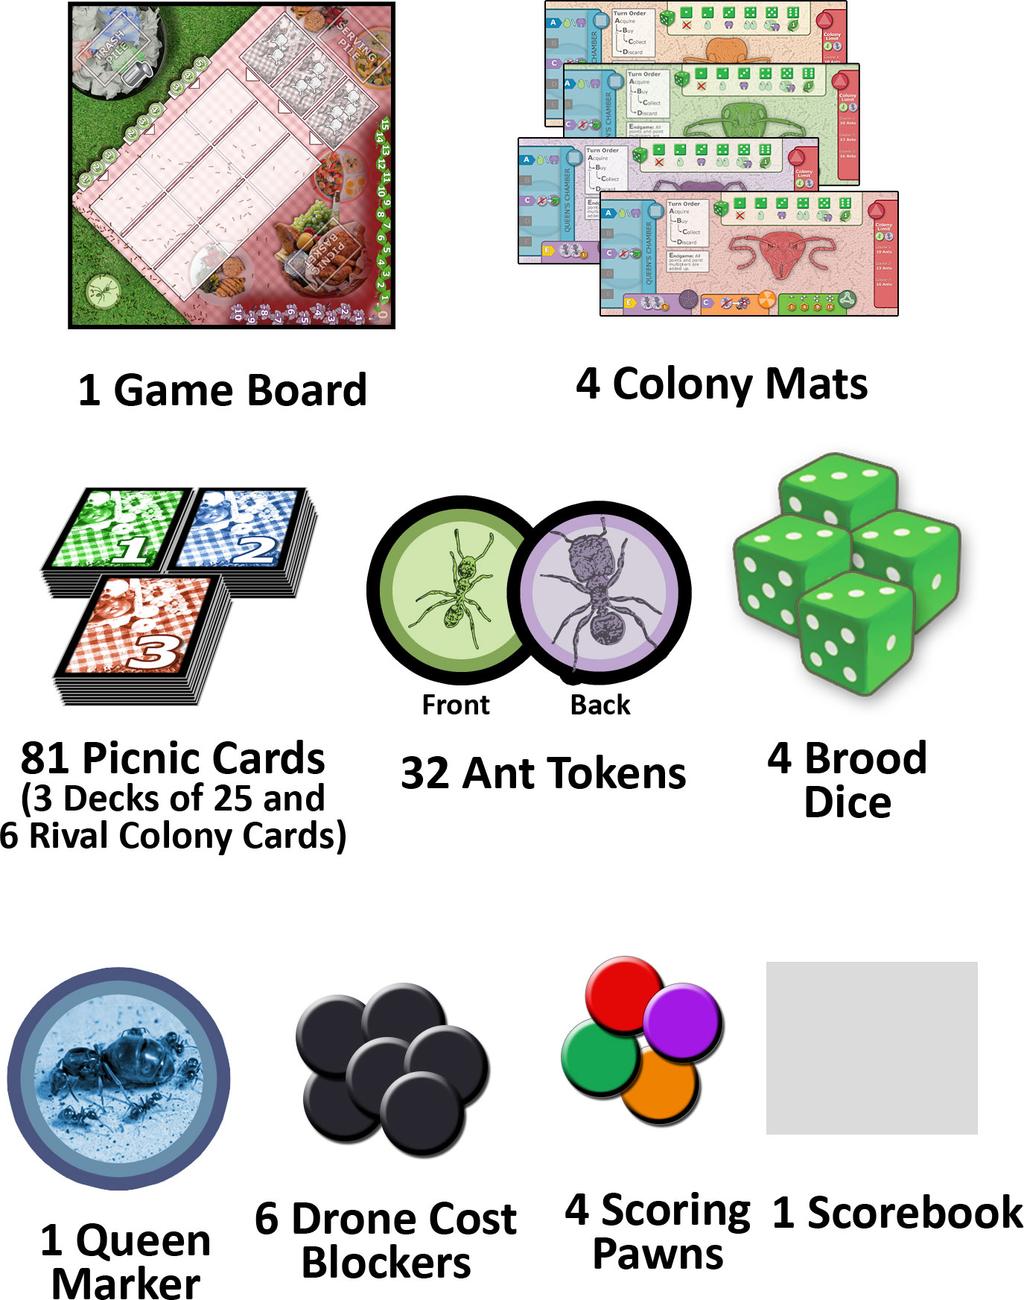 These cards can make their colonies more dominant or grant various powers that aid each player in achieving dominance.